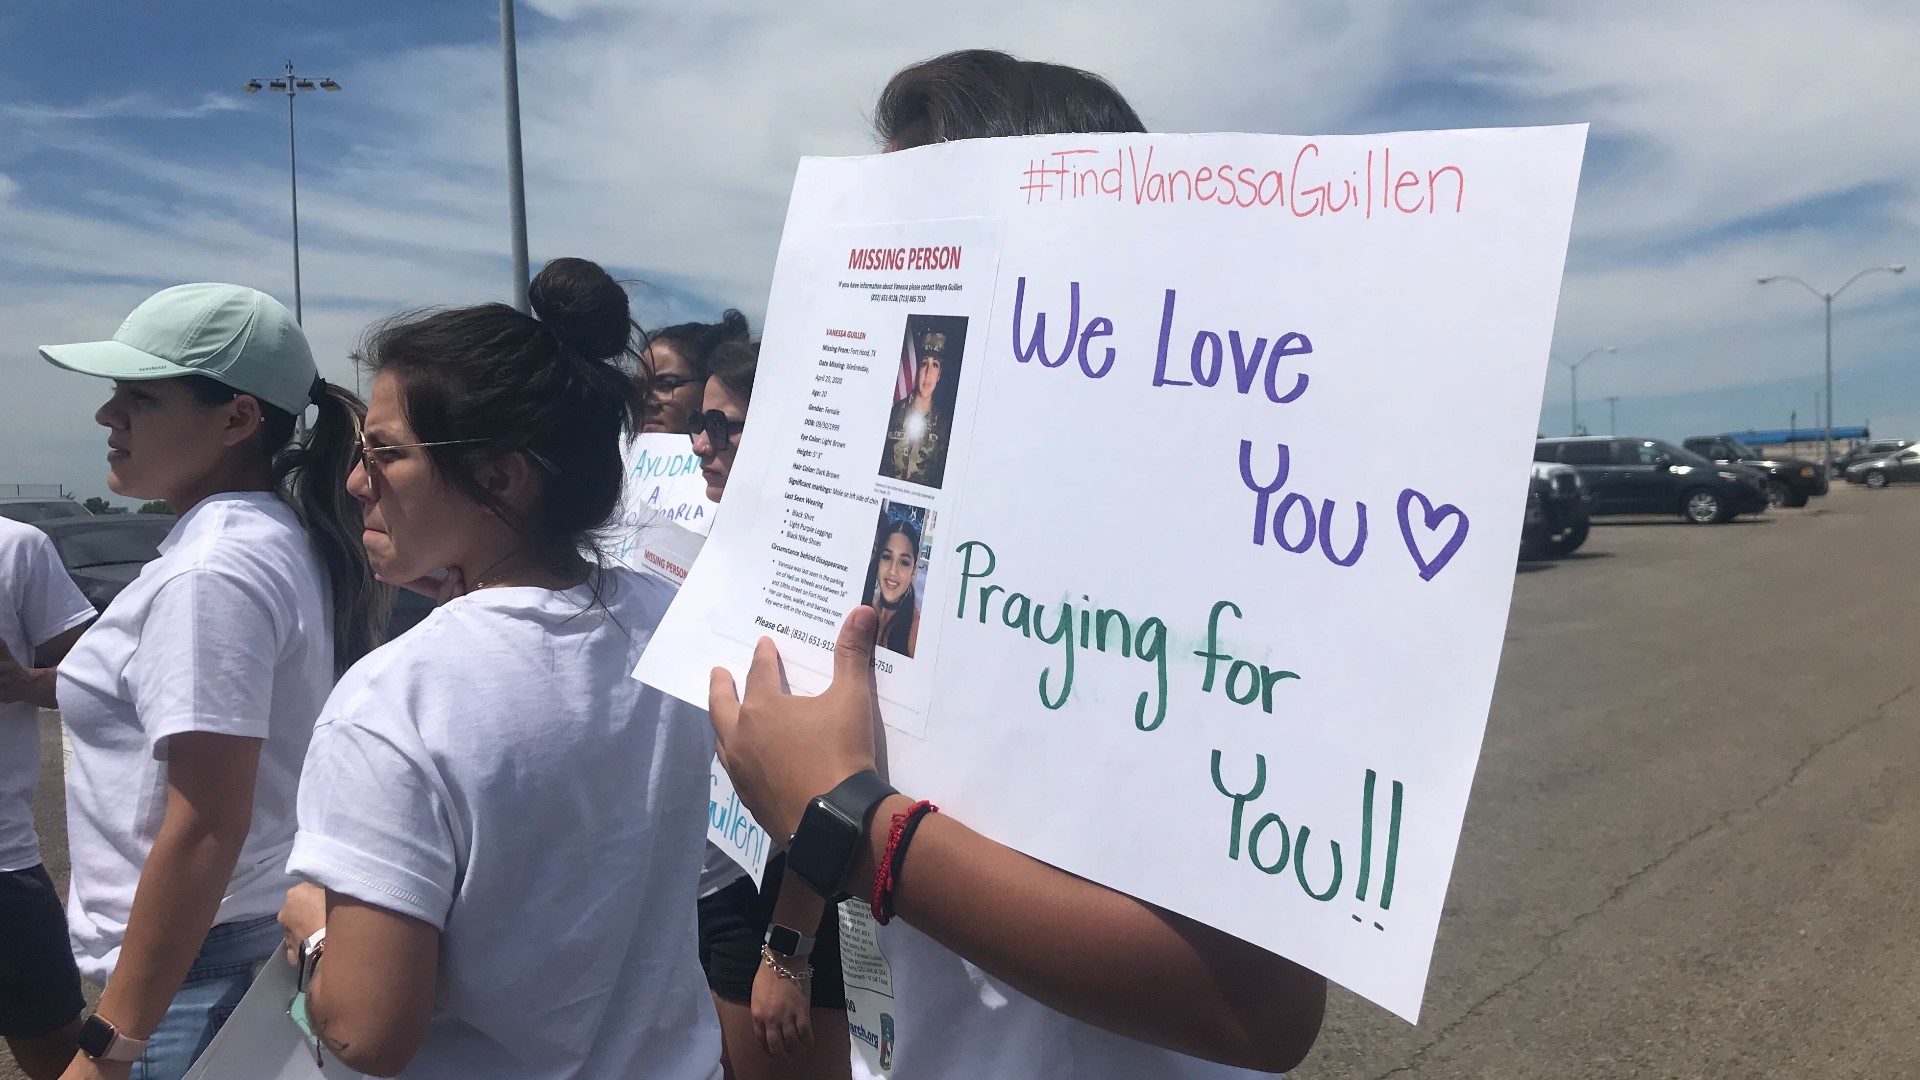 Pfc. Vanessa Guillen has been missing for a month and family and friends say they will continue searching for her and demanding answers.